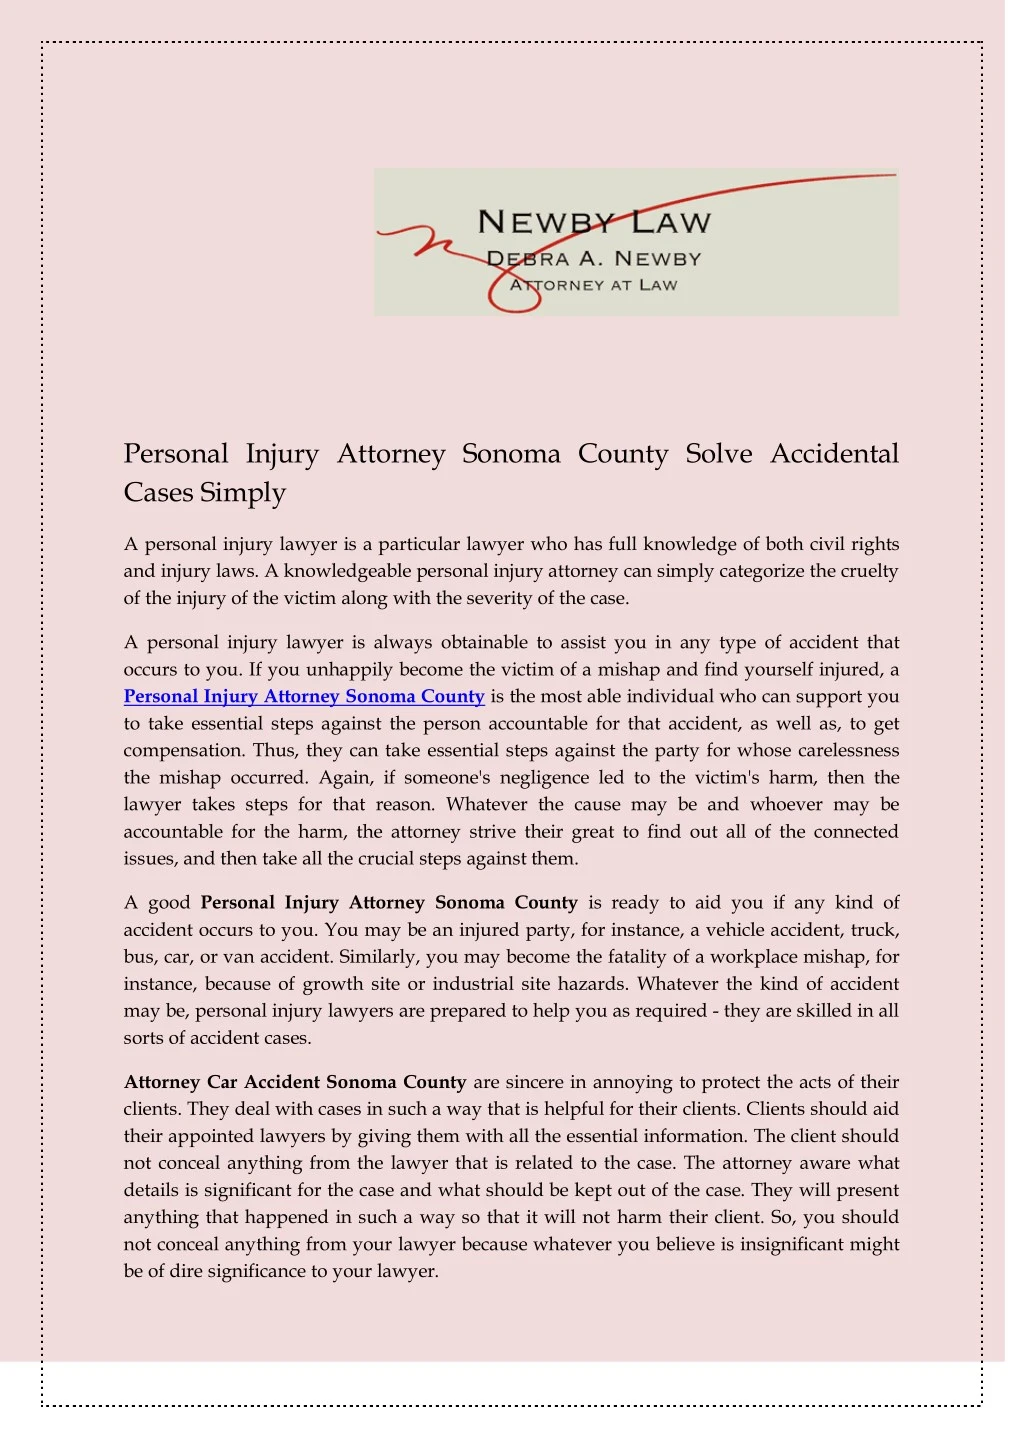 personal injury attorney sonoma county solve